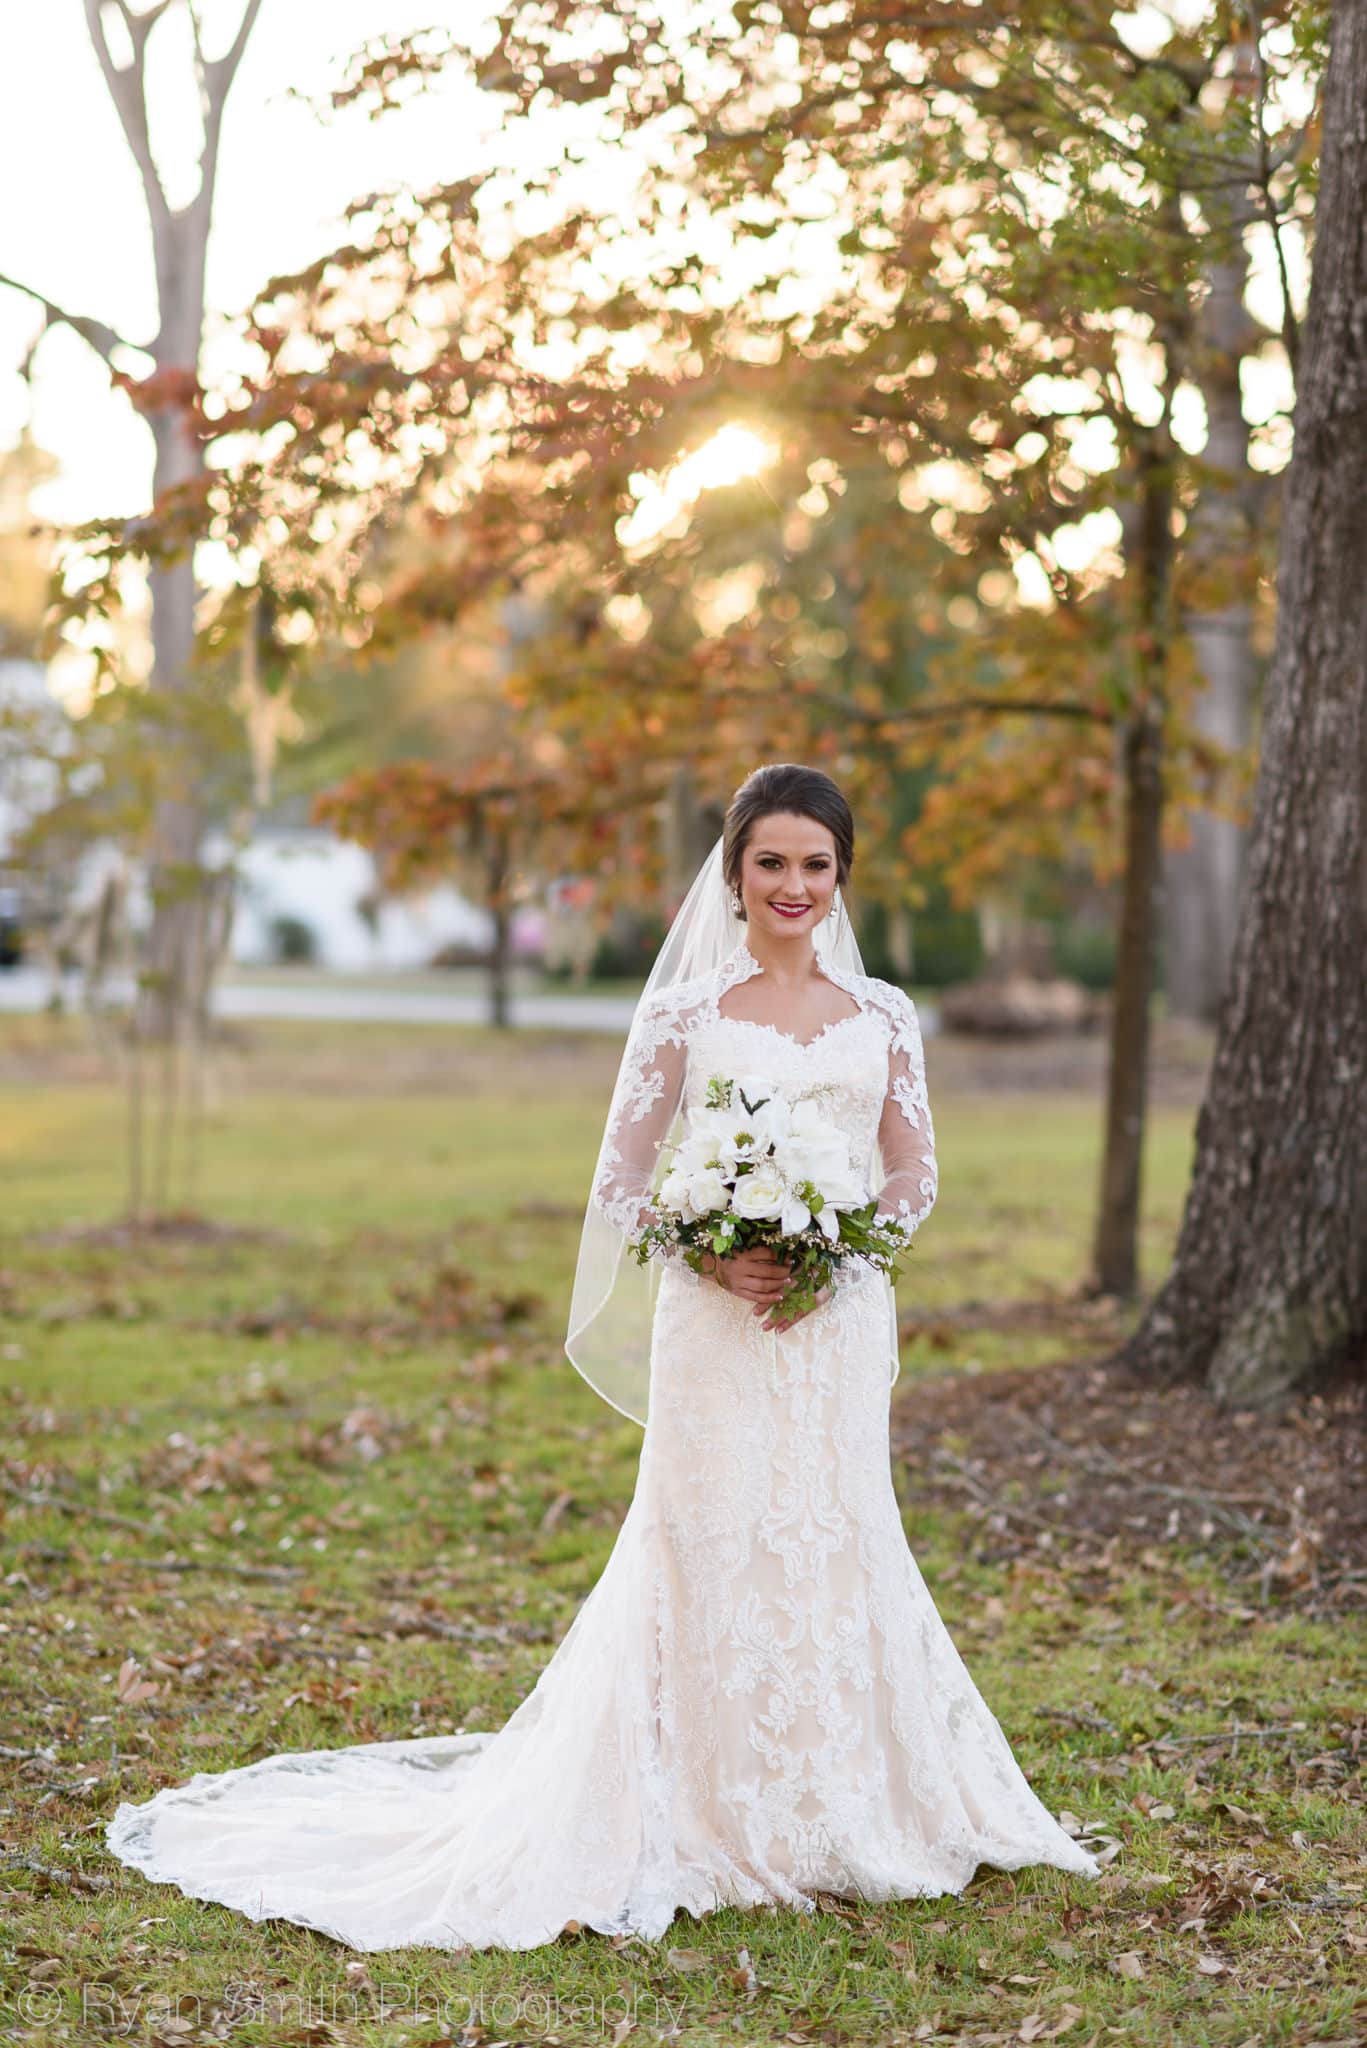 Bridal portraits backlit by sunlight coming through the trees - Rosewood Manor, Marion